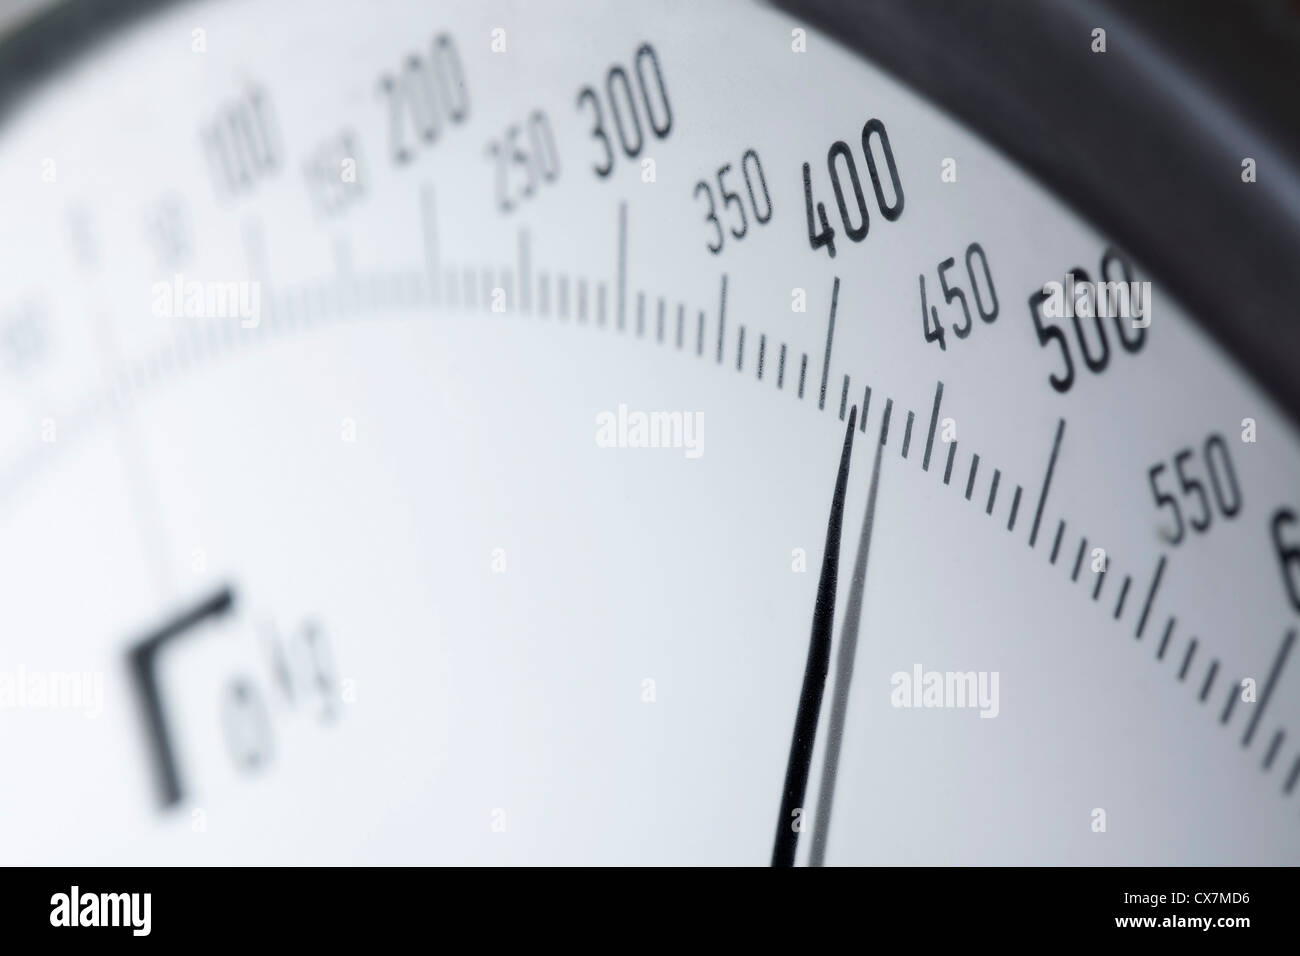 Numbers on a kitchen scale, extreme close up Stock Photo